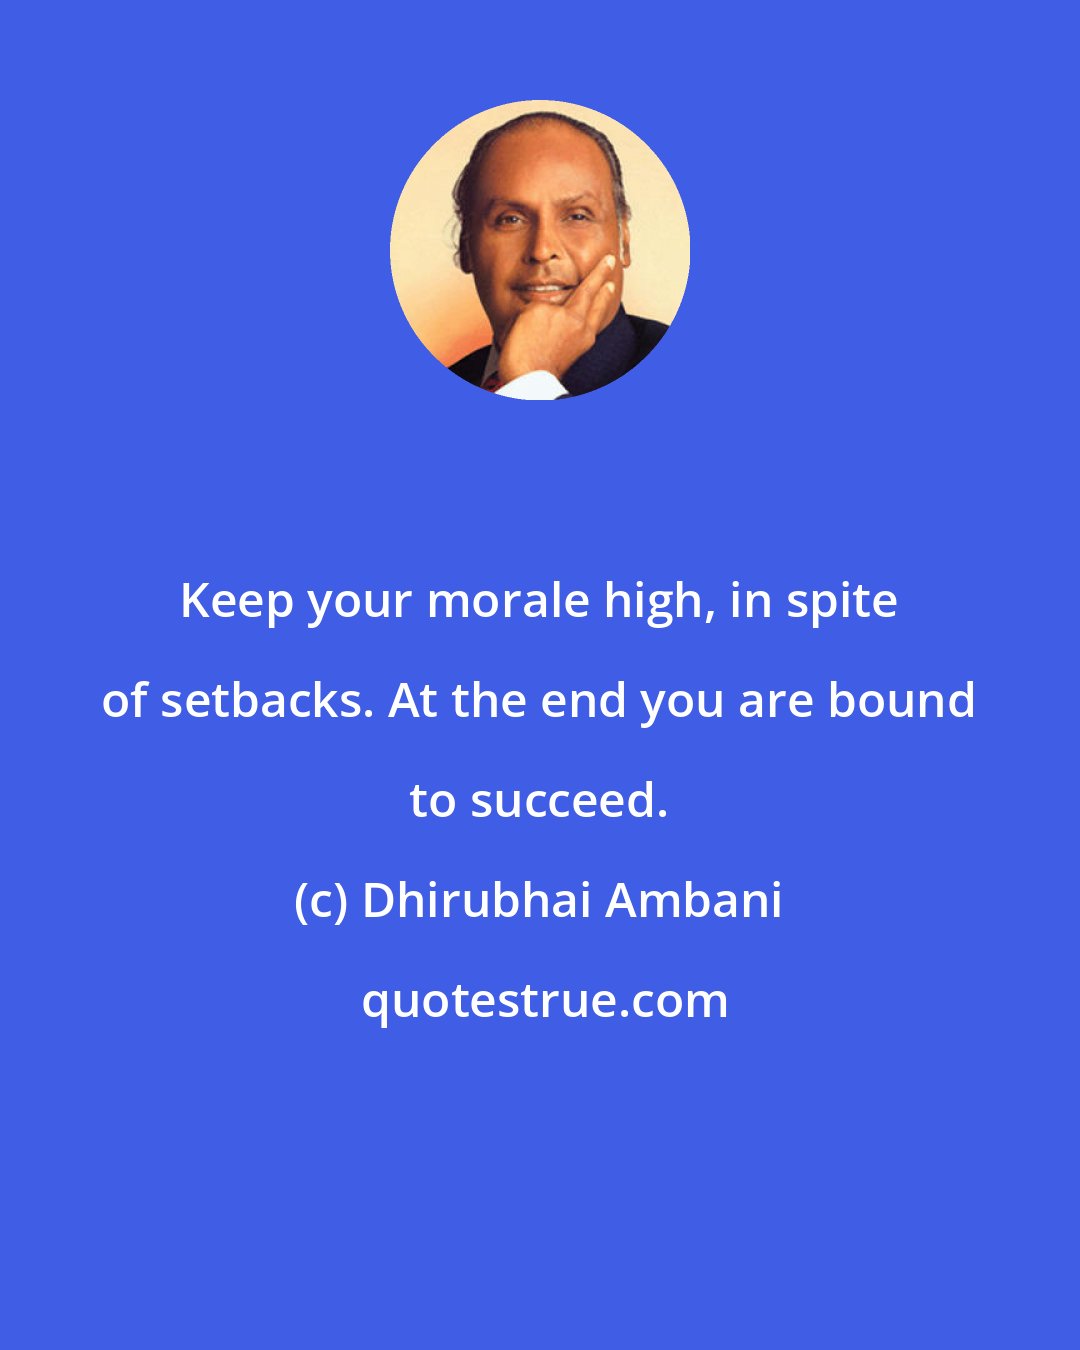 Dhirubhai Ambani: Keep your morale high, in spite of setbacks. At the end you are bound to succeed.